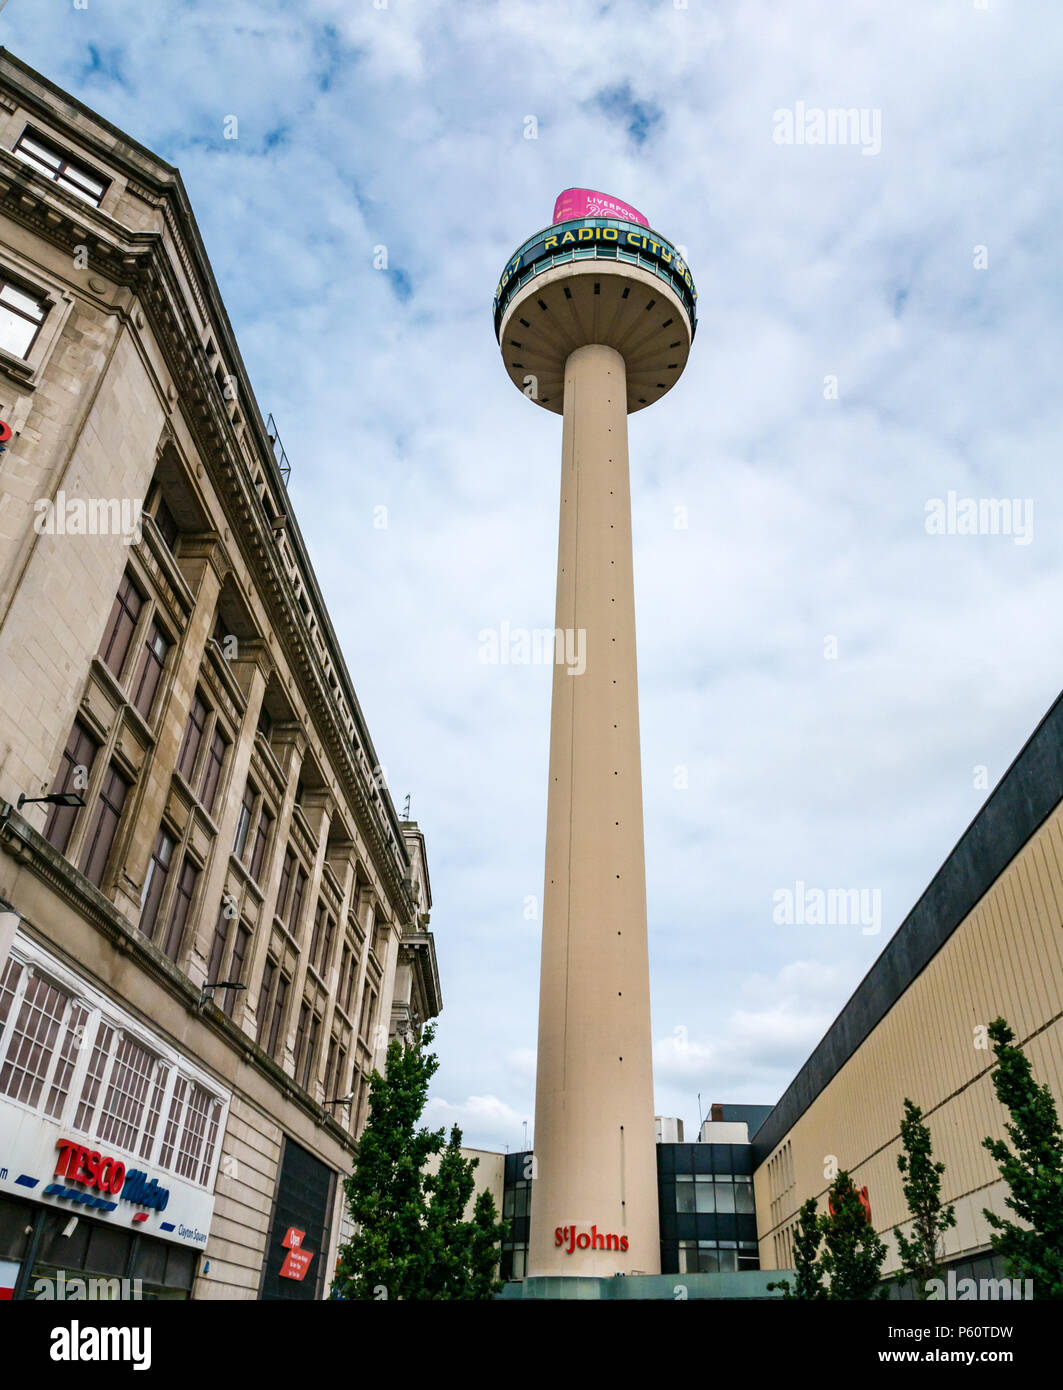 1960s Radio City Tower or St Johns Beacon observation tower, Liverpool, England, UK dwarfs other buildings Stock Photo